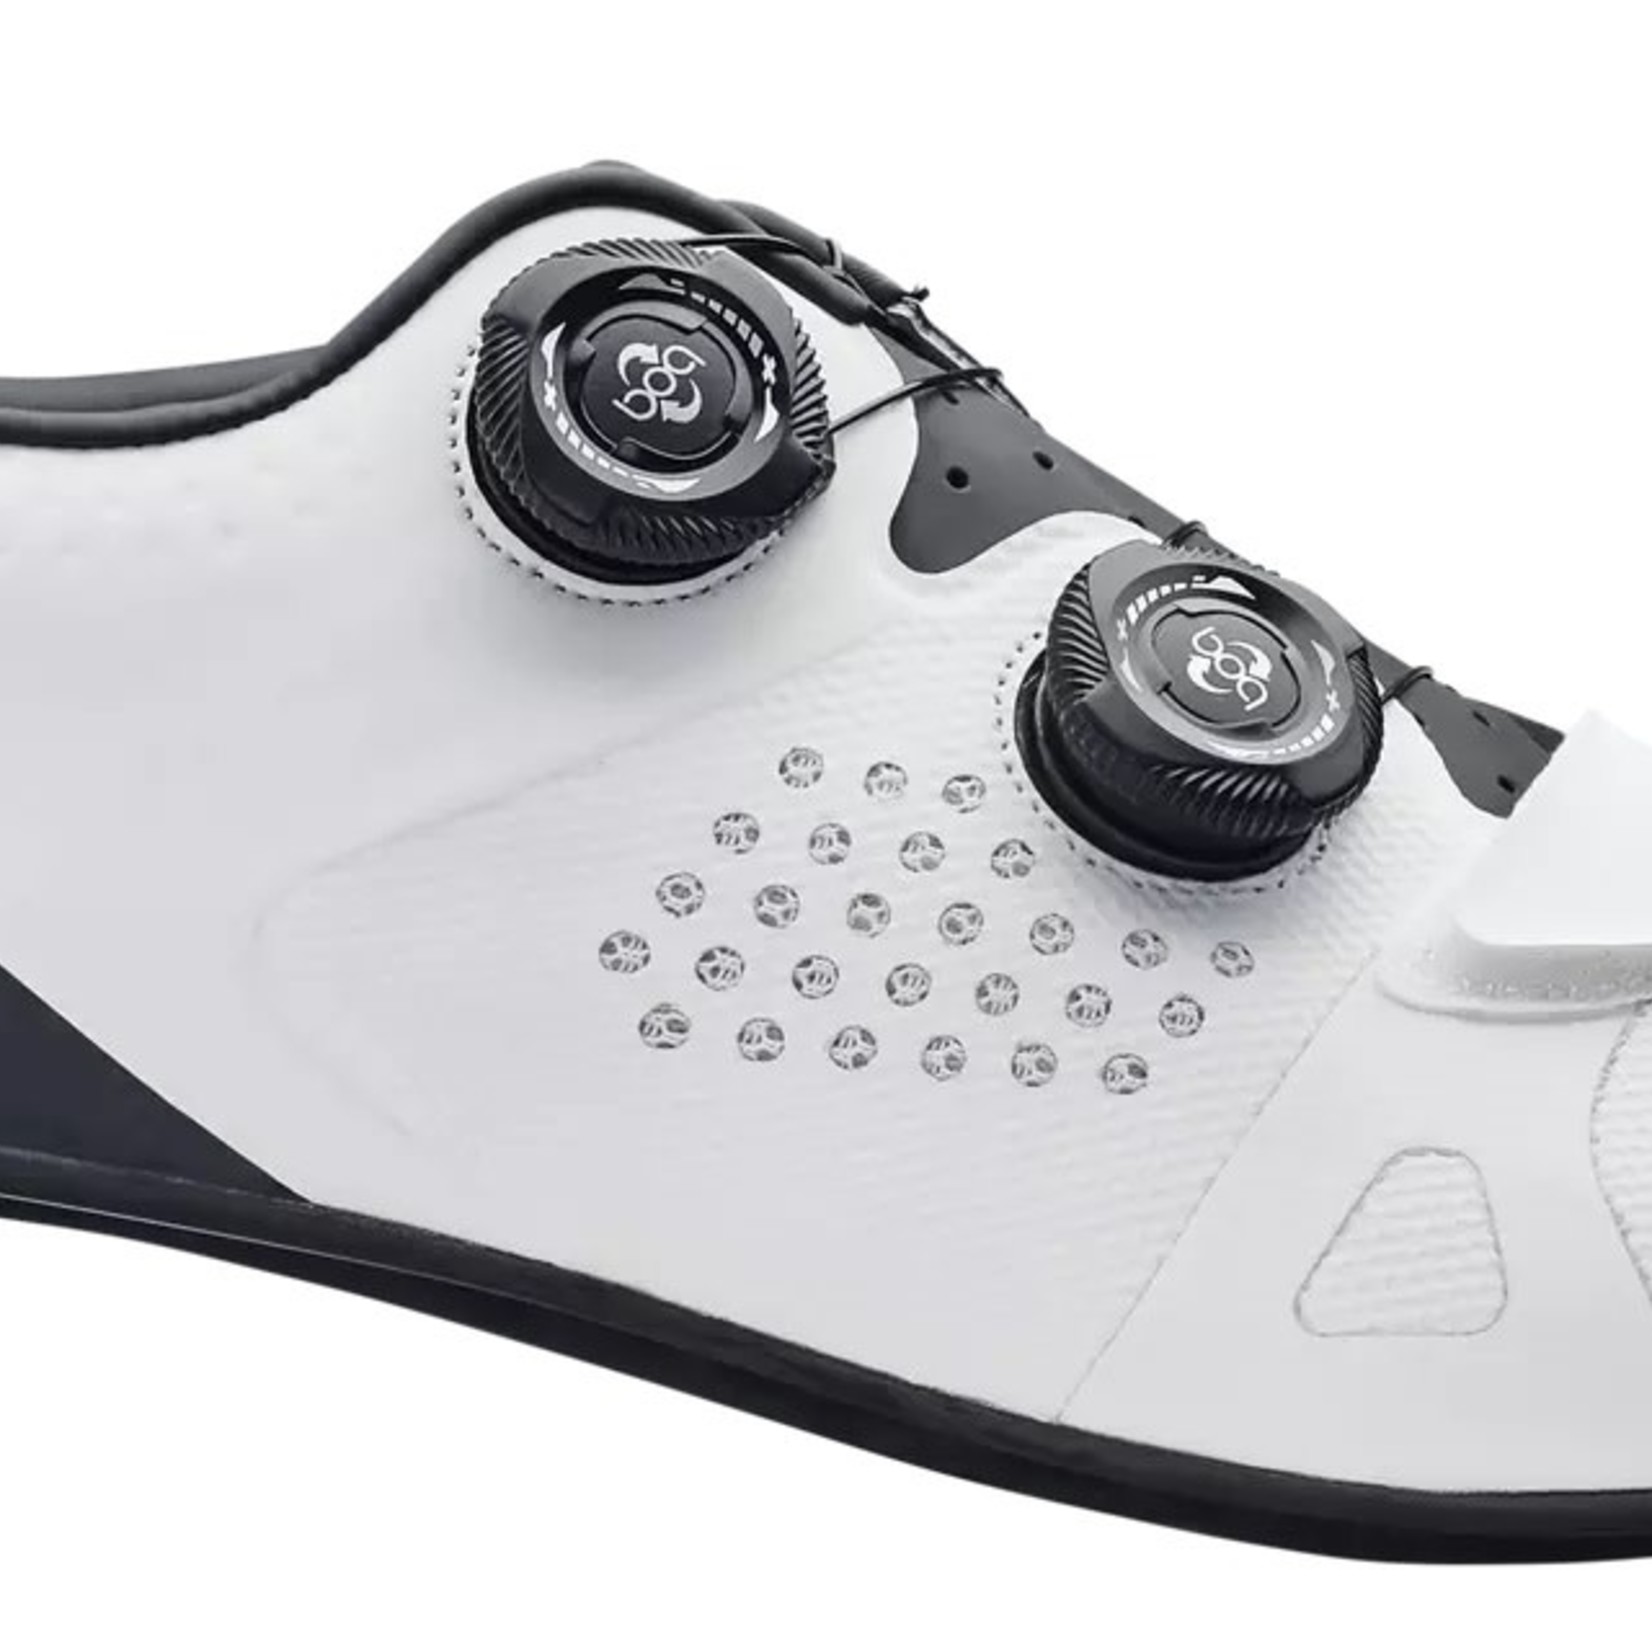 Specialized SPECIALIZED, Torch 3.0 Road Shoes WHITE